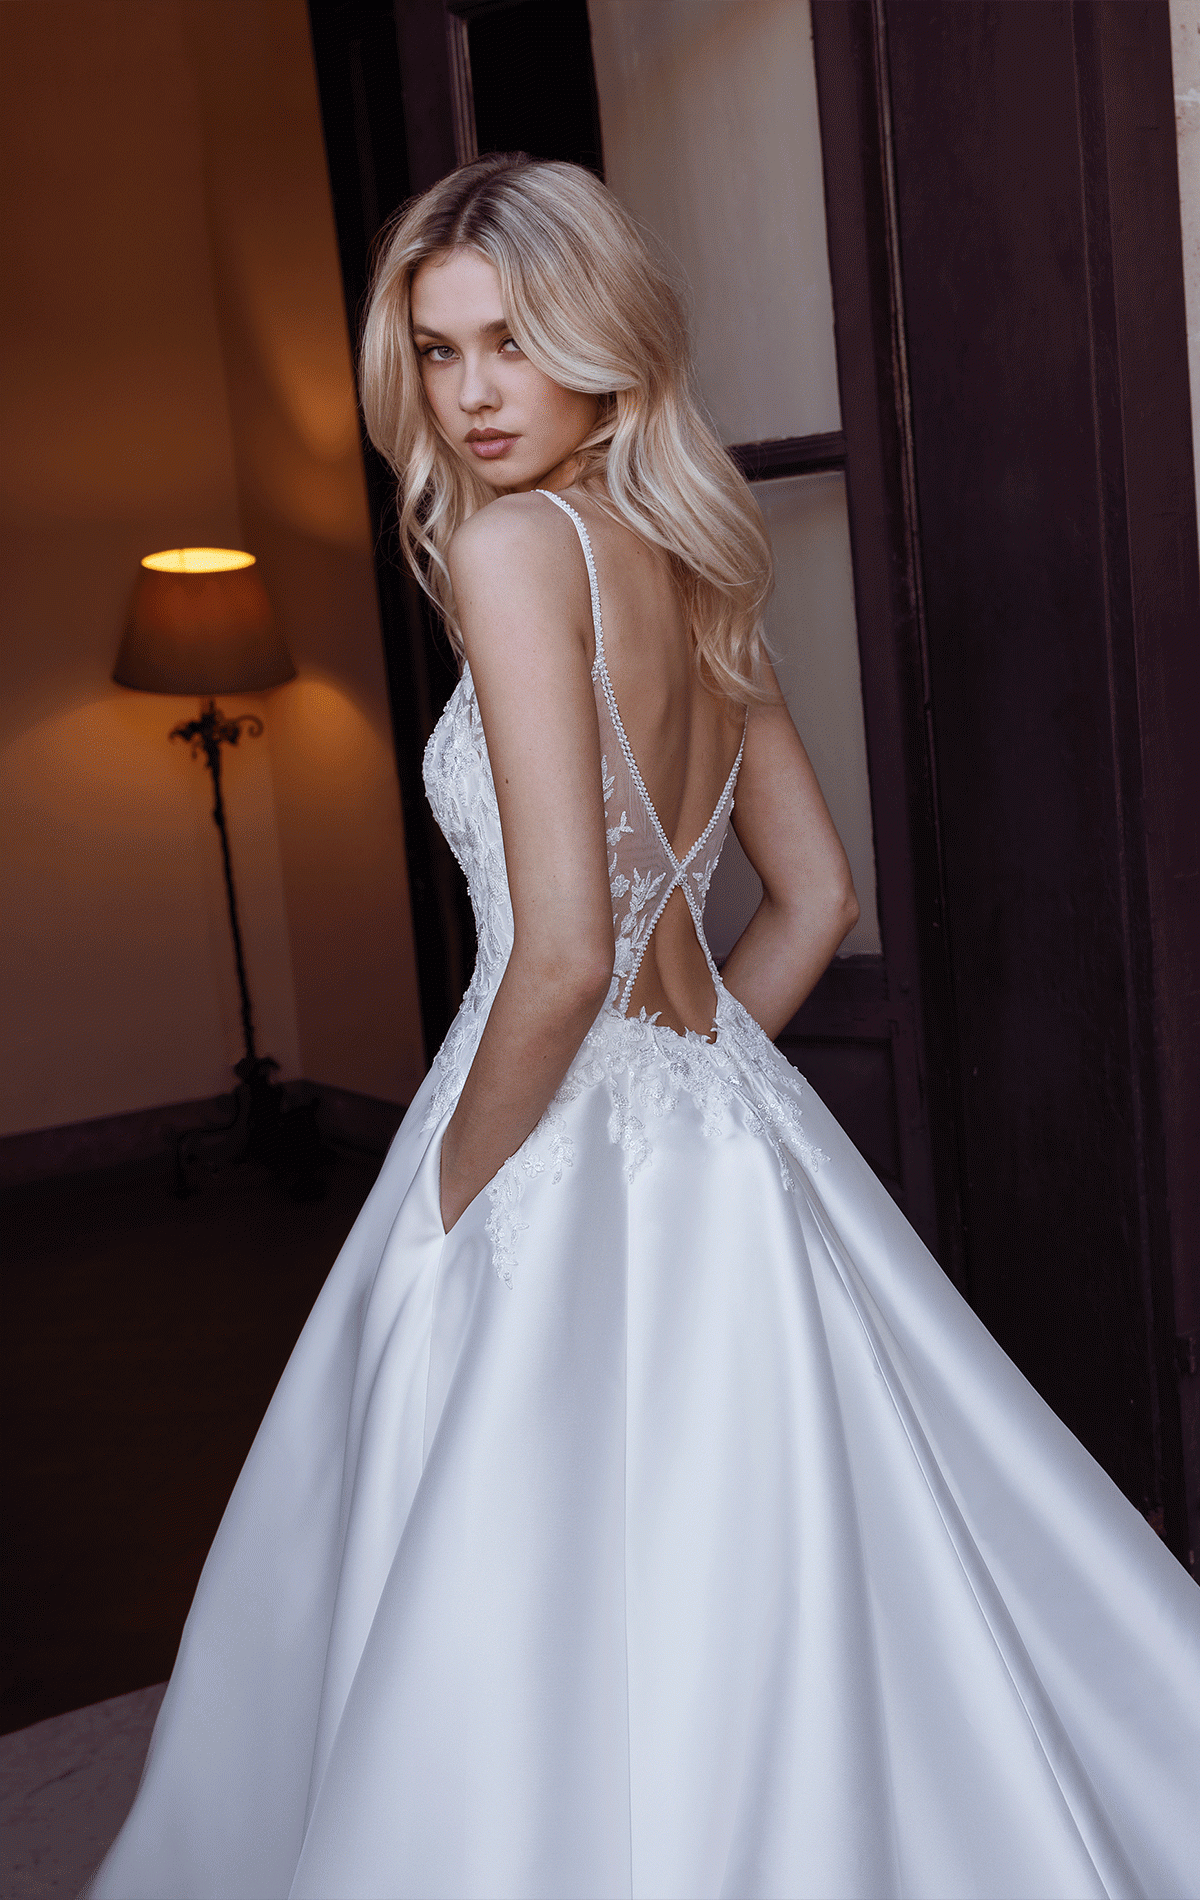 River - SOLD - Modeca River - Mikado A-line wedding dress with beaded Spaghetti straps - at Blessings Wedding & Occasion Dress Boutique, Brighton. East Sussex. BN1 5GG T: 01273 505766 E: info@blessingsbridal.co.uk